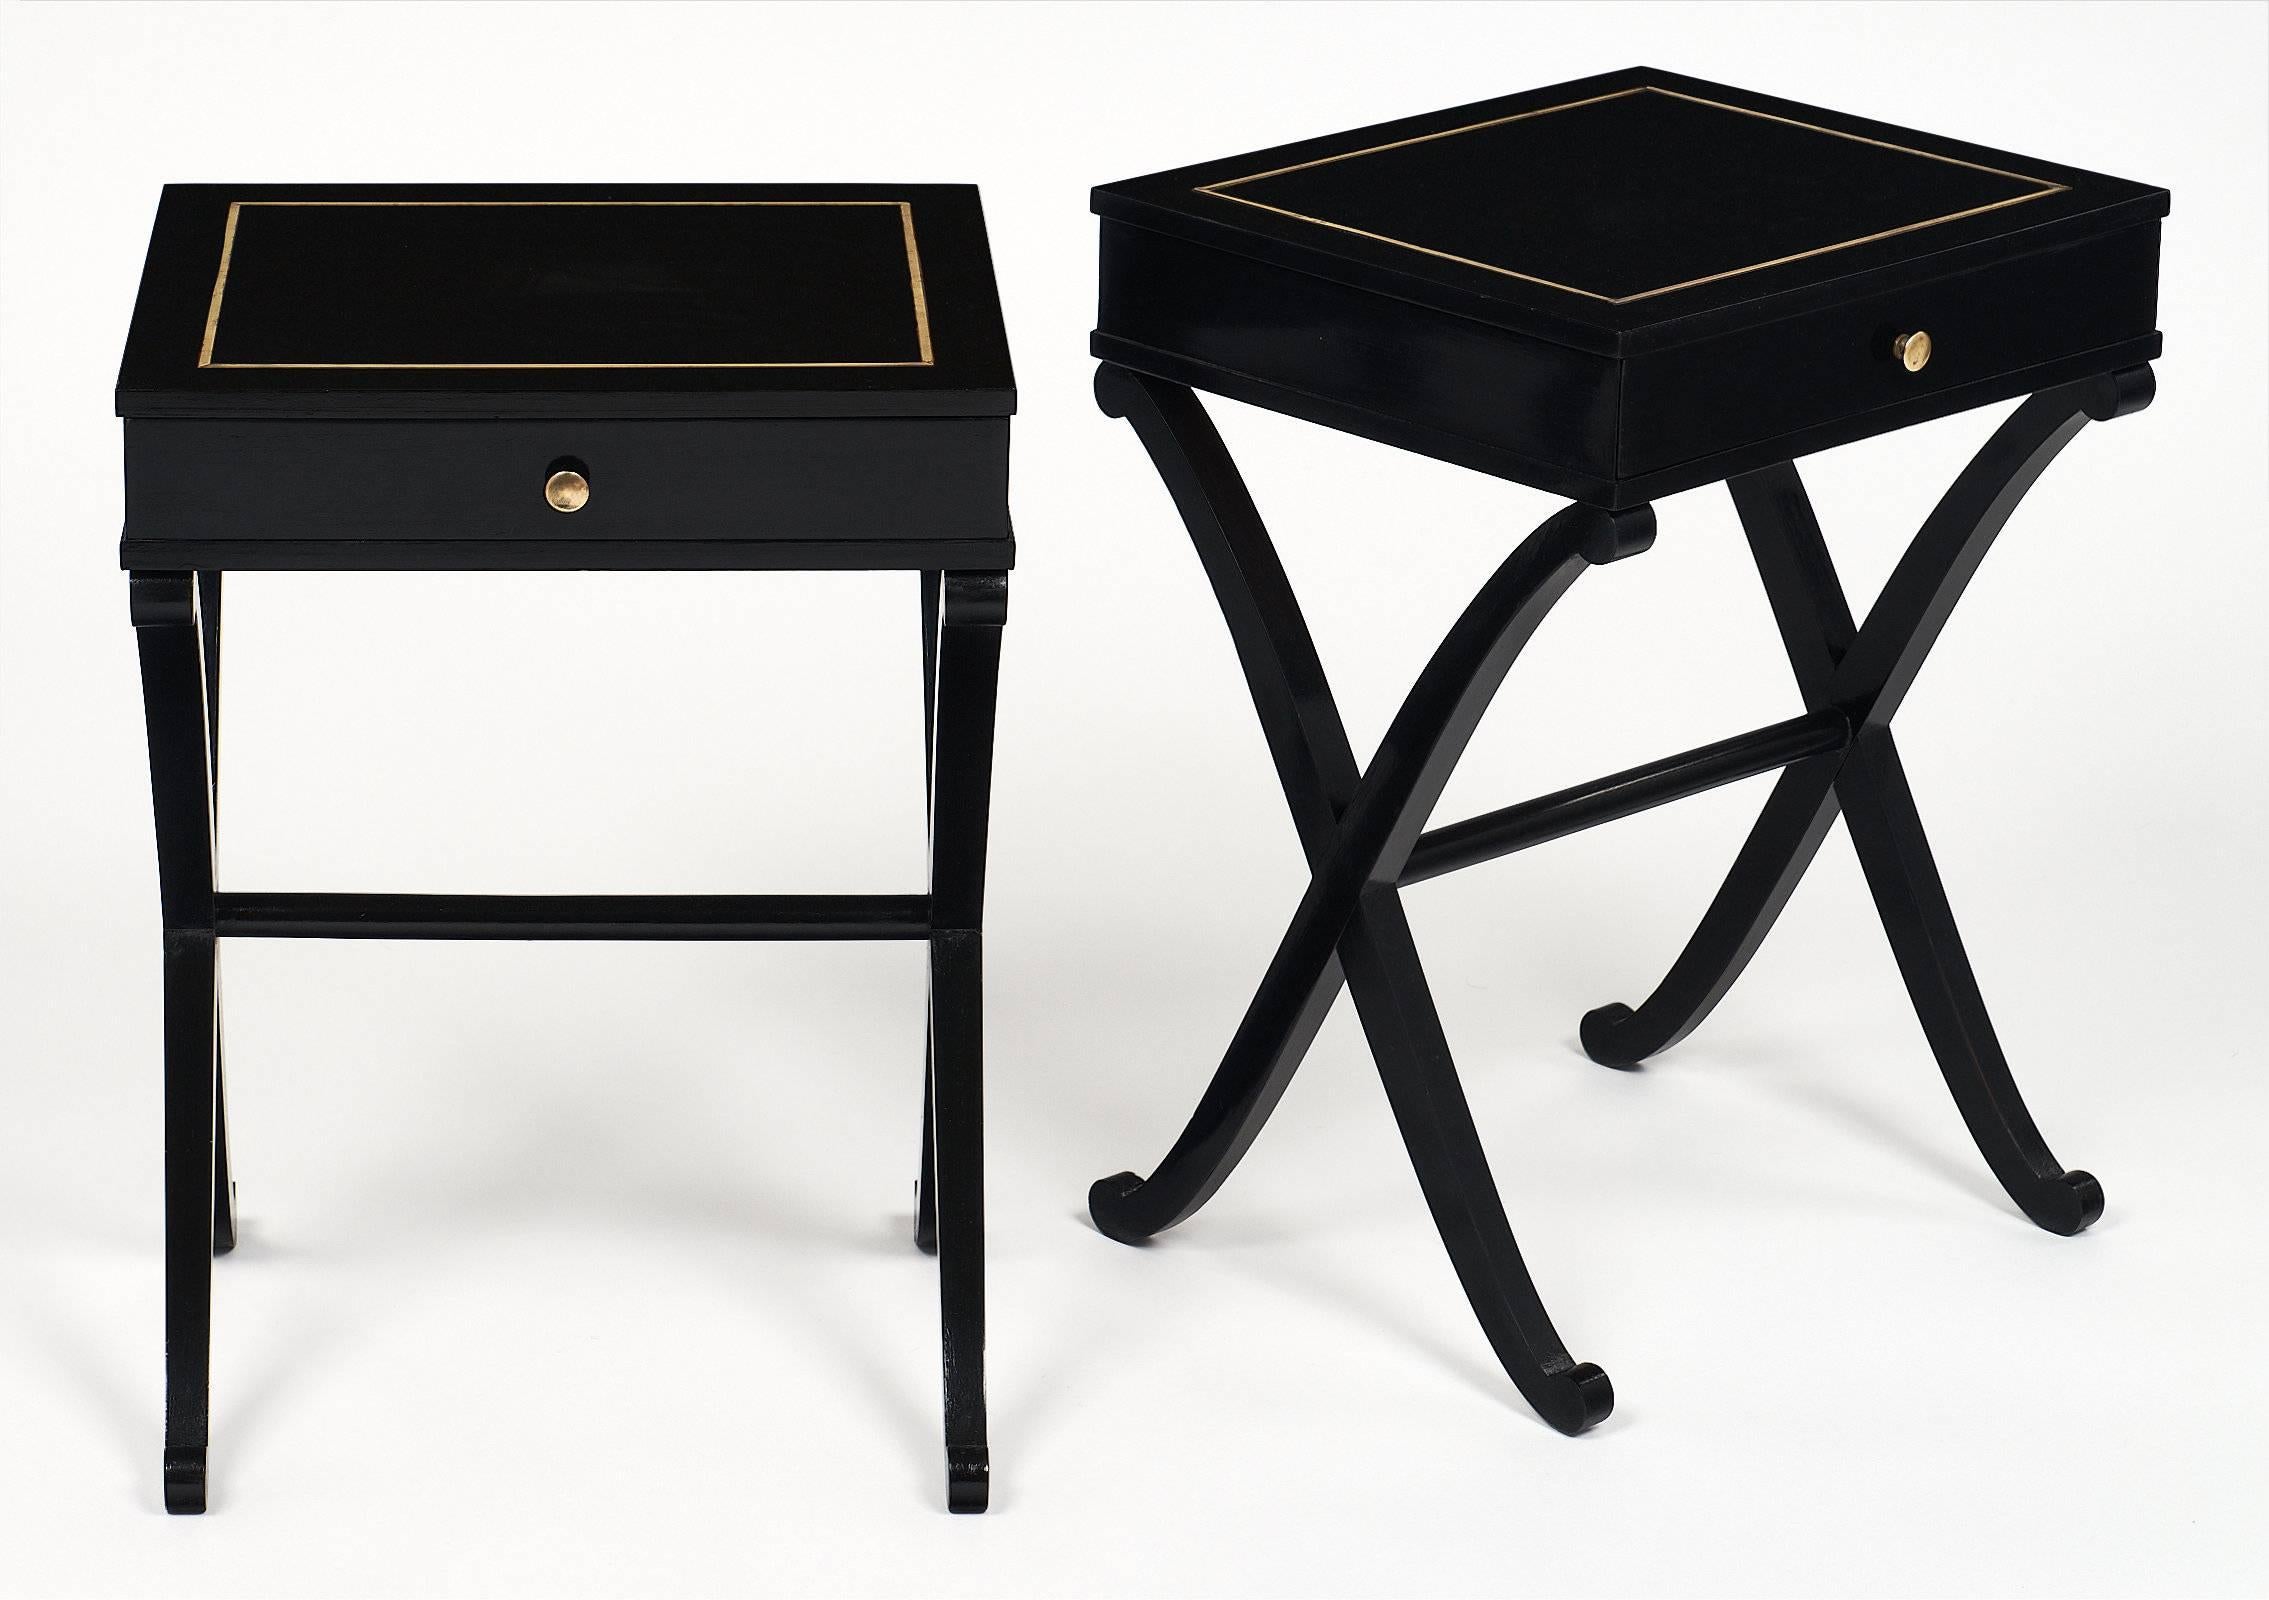 A French gracefully proportioned pair of side tables of ebonized mahogany and French polished to a high lustre finish. The tops feature gilt brass inlays. We loved the X-shaped legs, and the quality of the craftsmanship which shows in every details.